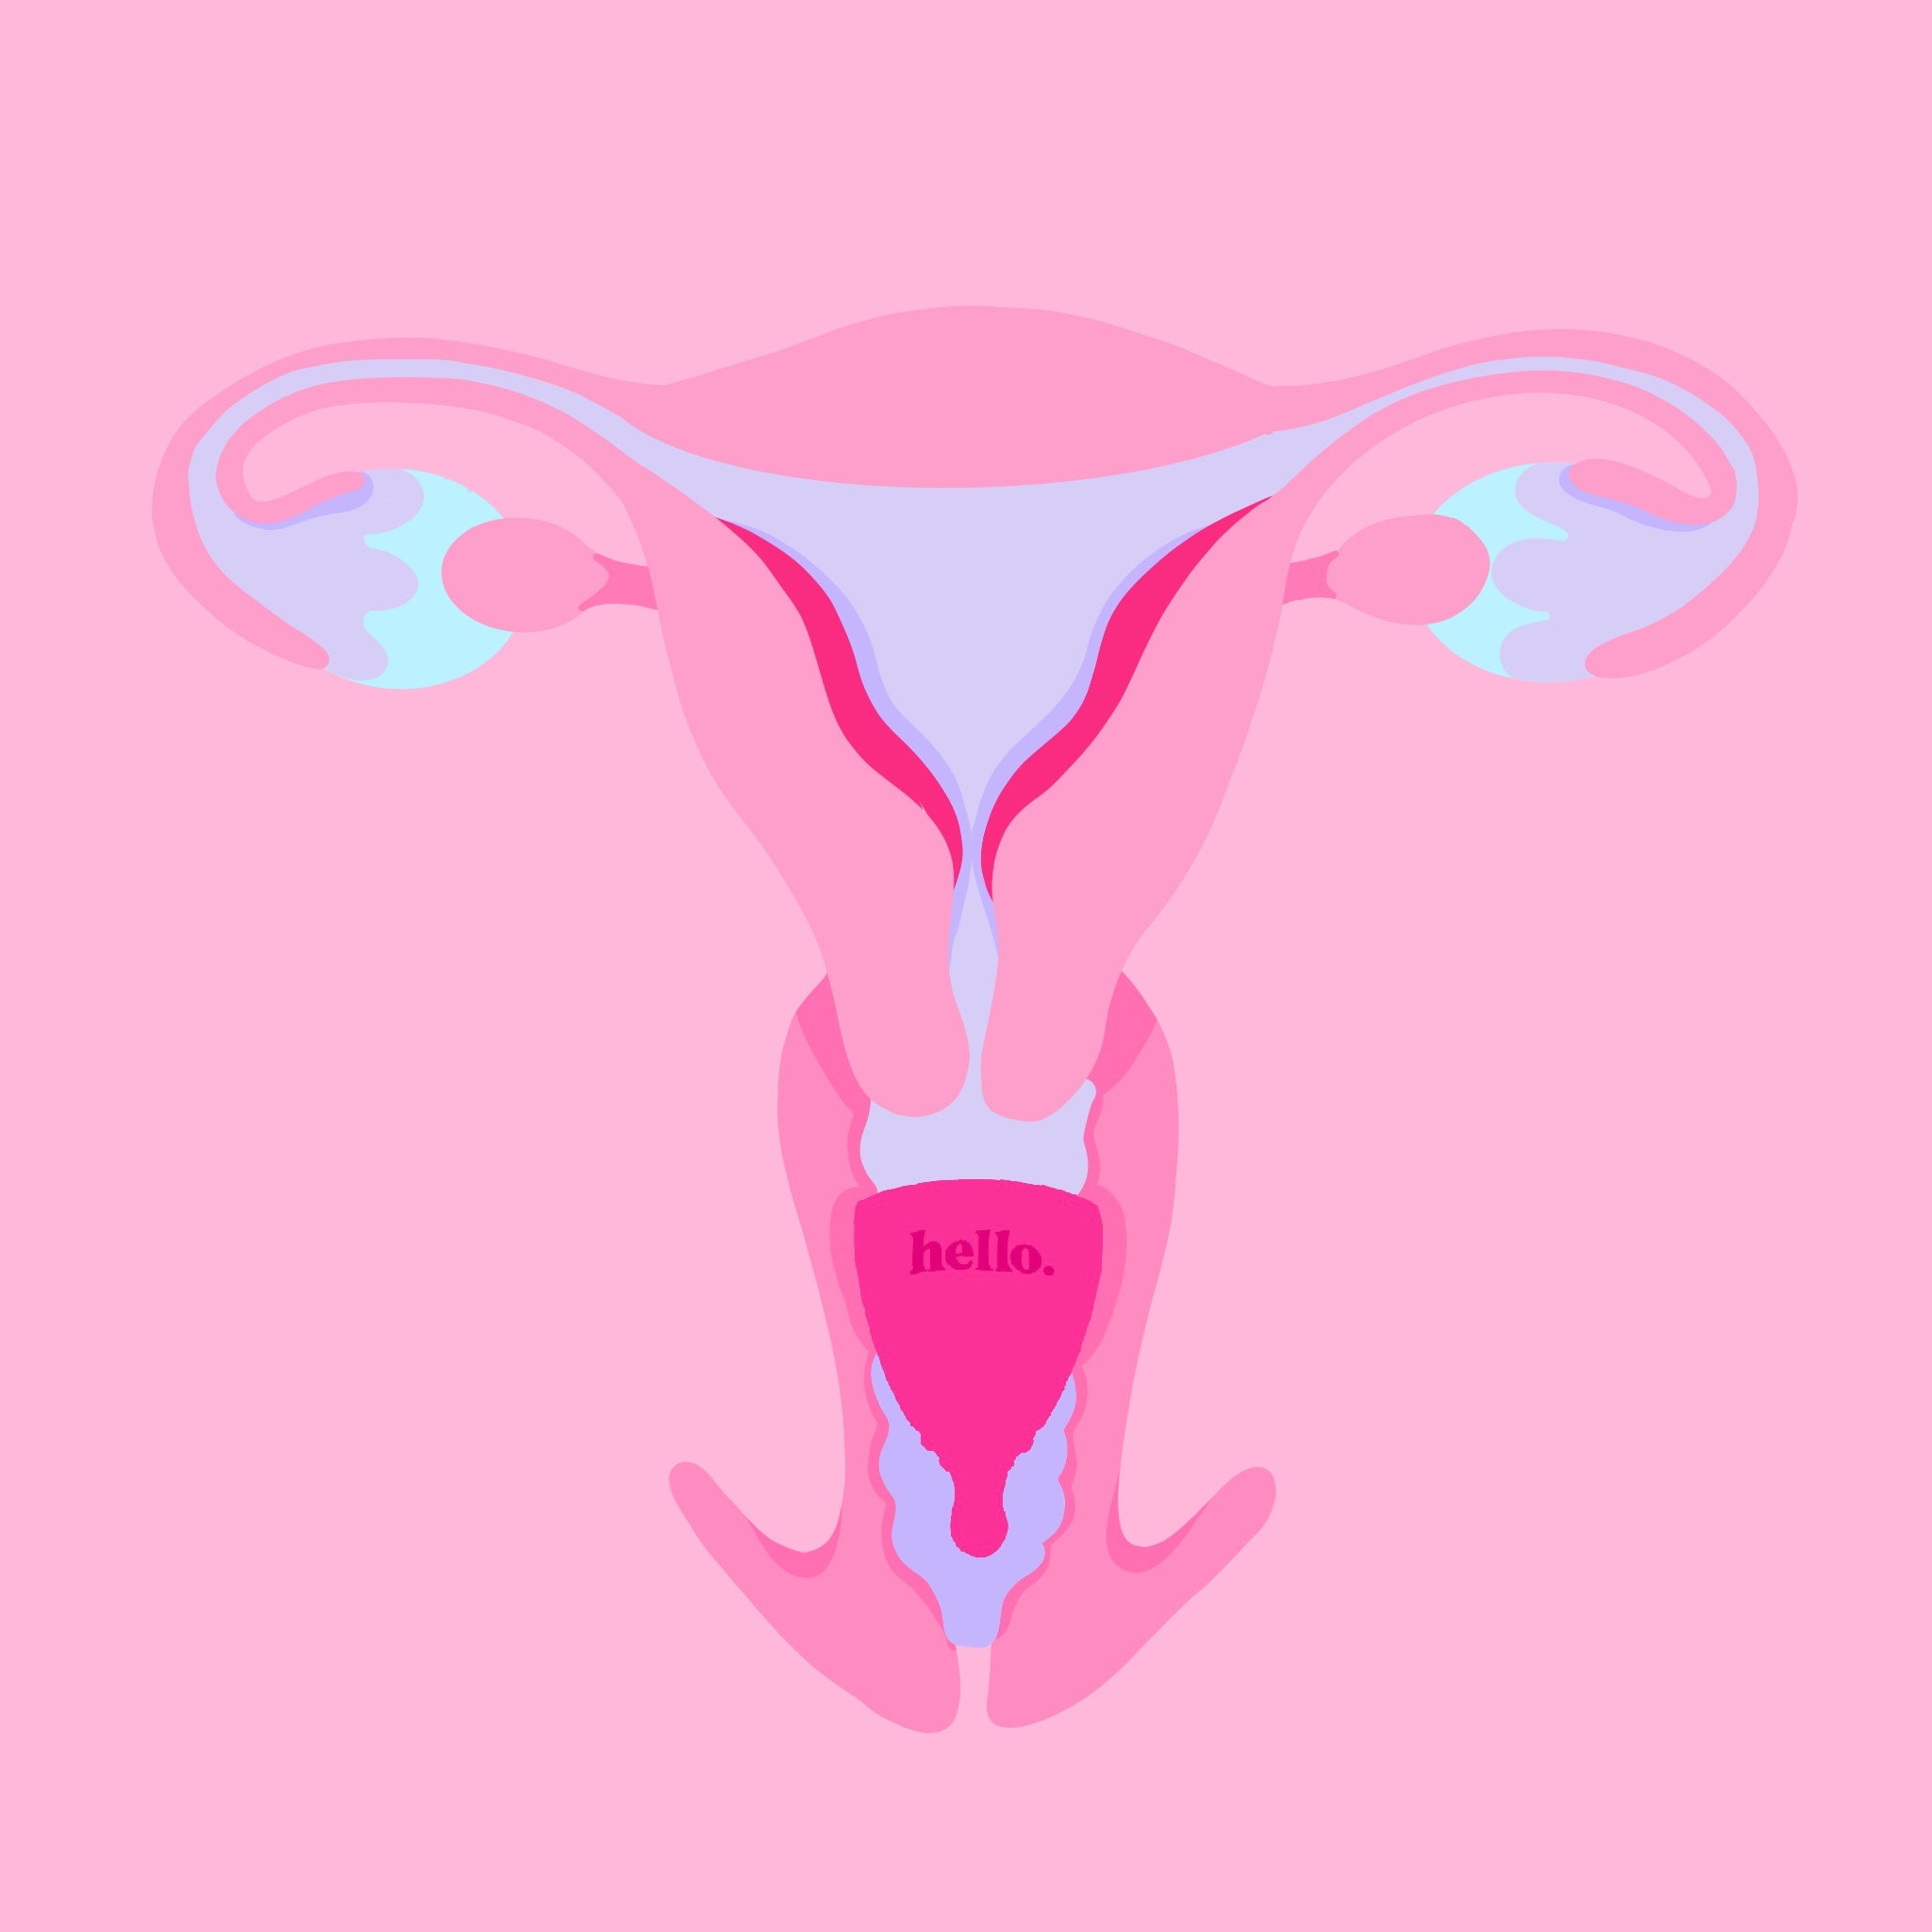 The Hello Cup™ - Average Cervix Cup